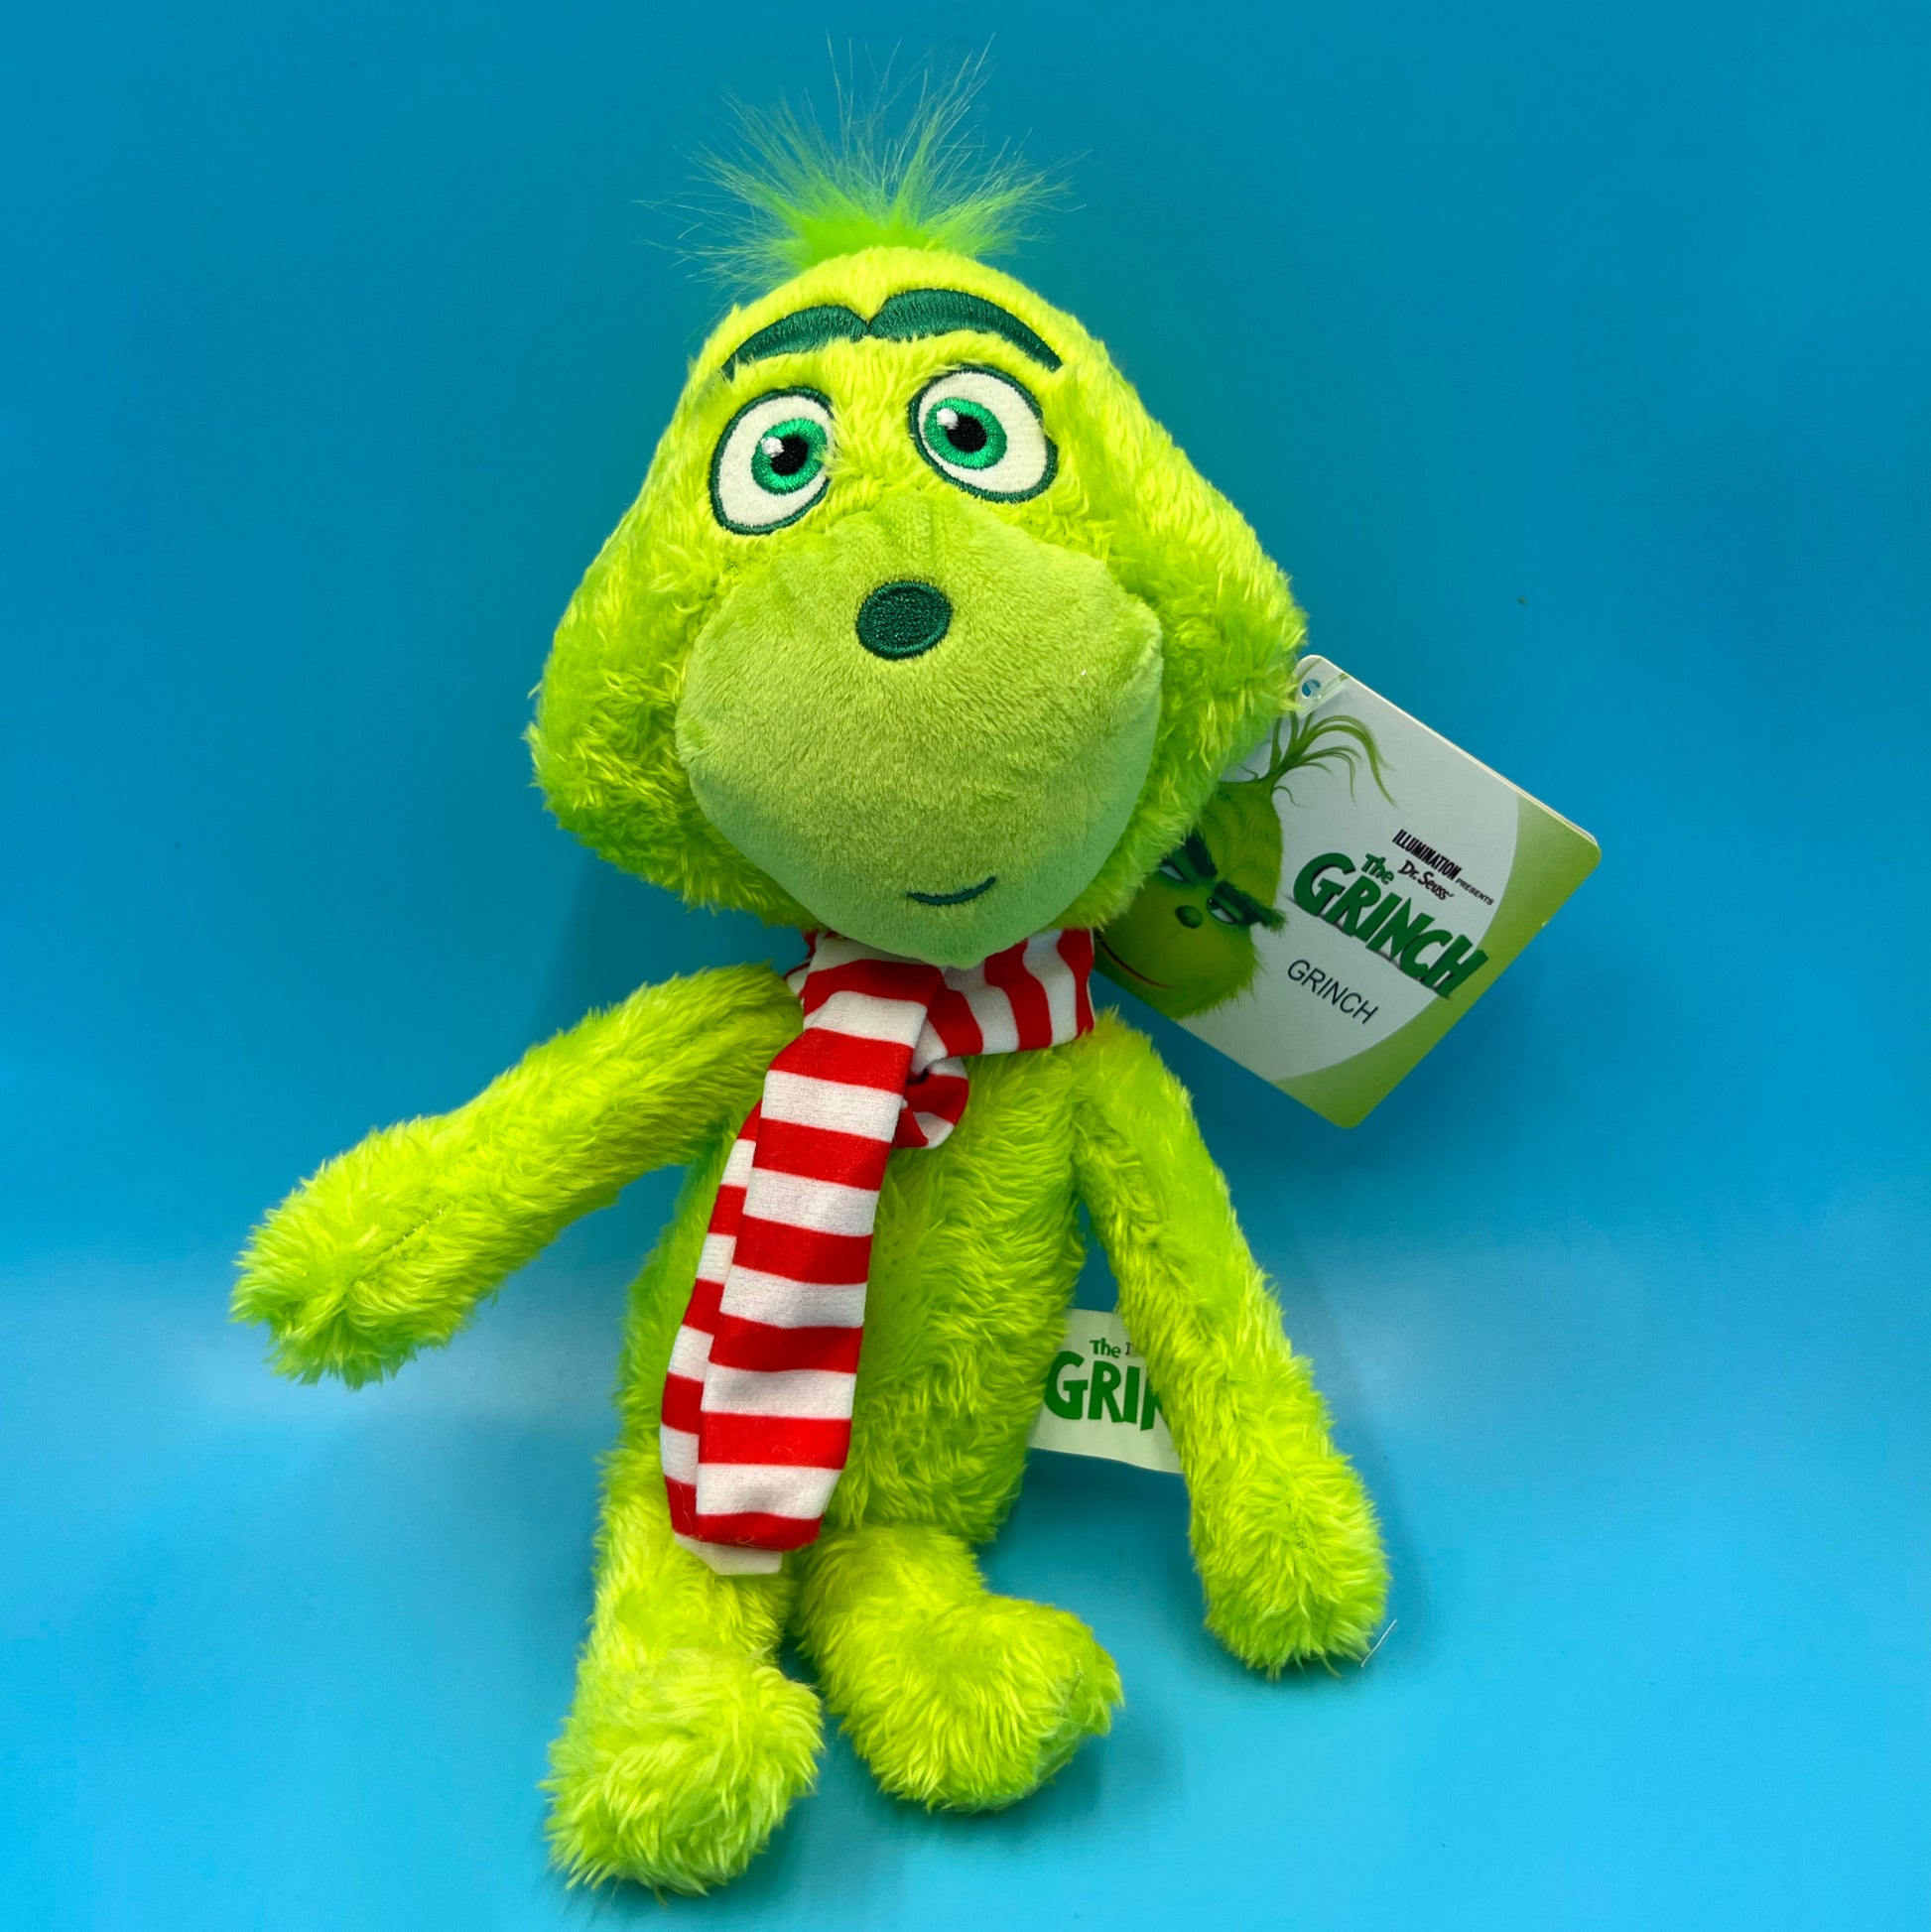 The grinch scarf Toy bearsupreme